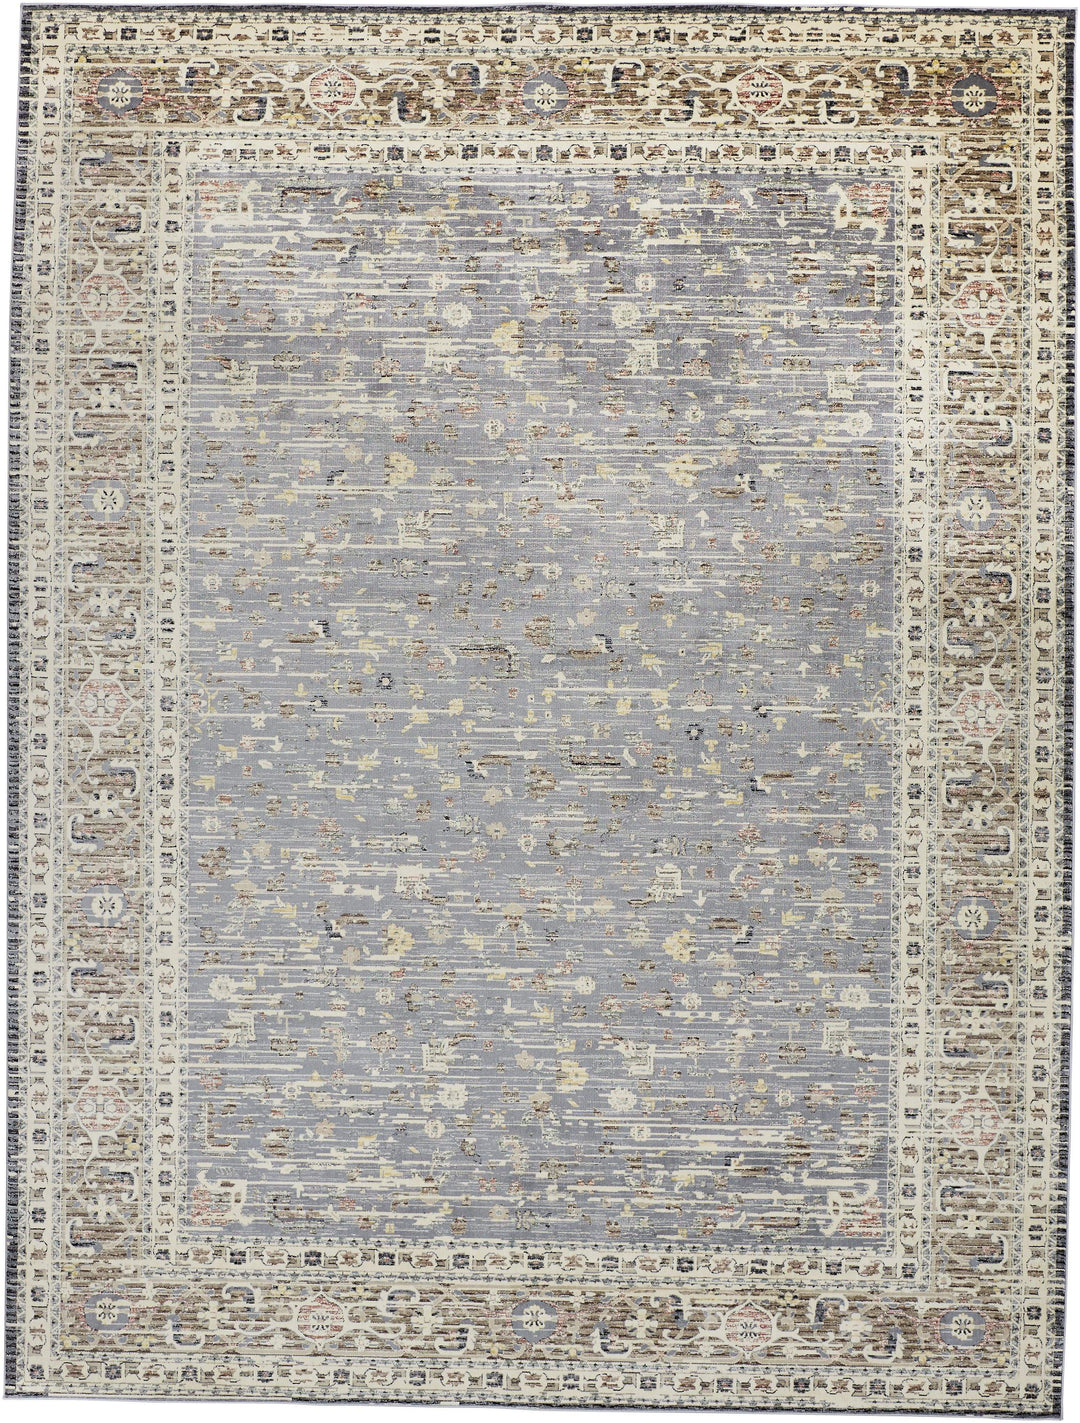 Feizy Feizy Grayson Gebbah Style Kilim Rug - Natural Tan & Gray - Available in 5 Sizes 3'-11" x 5'-5" 8563914FGRY000C84